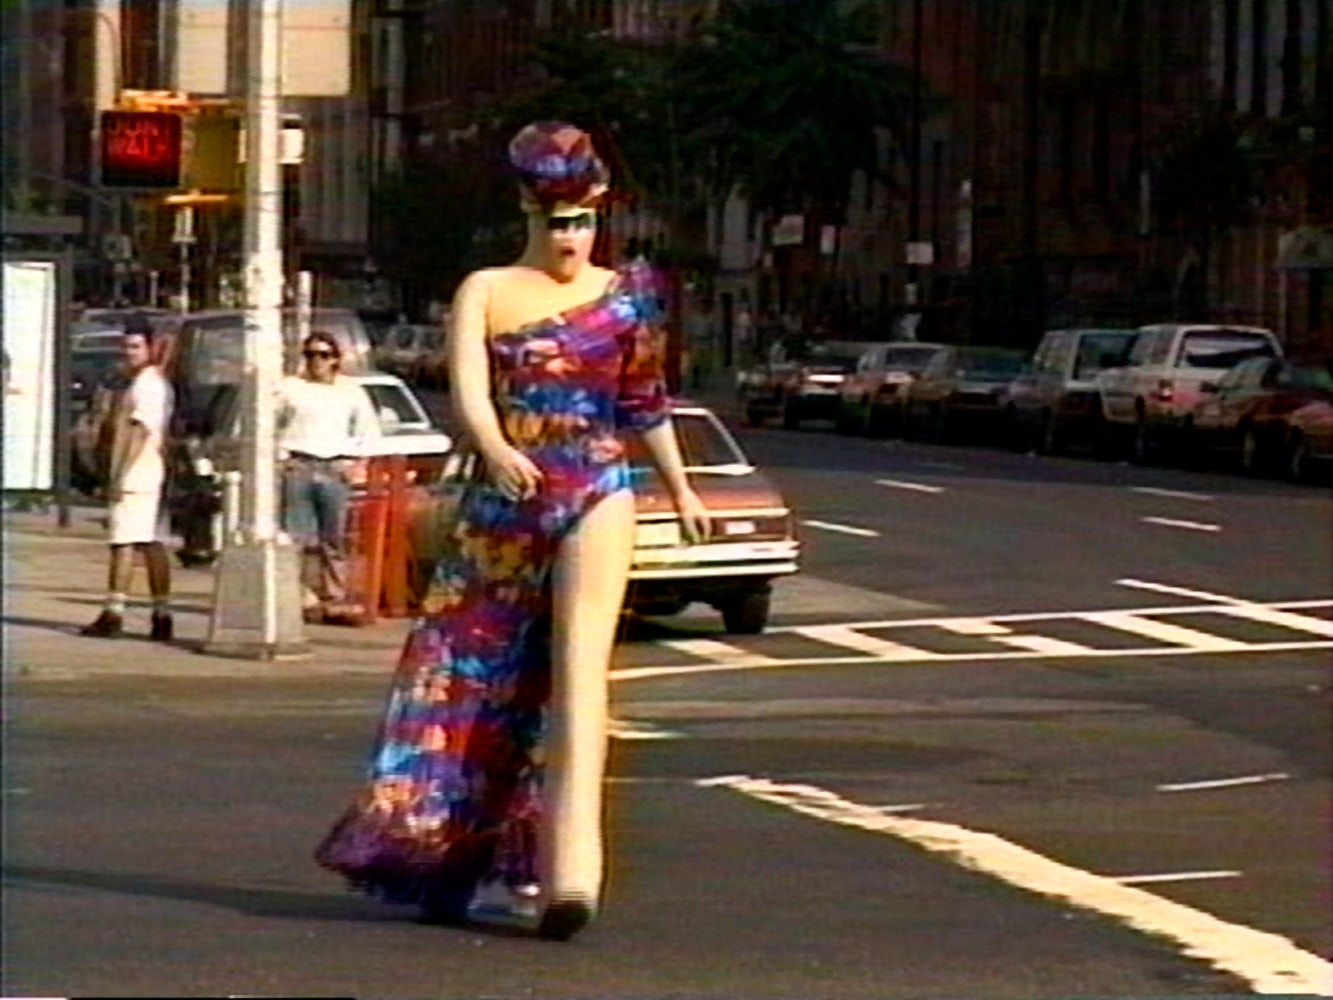 Charles Atlas
Mrs. Peanut Visits New York, 1992-1999
Video, sound
Duration: 6 minutes, 8 seconds